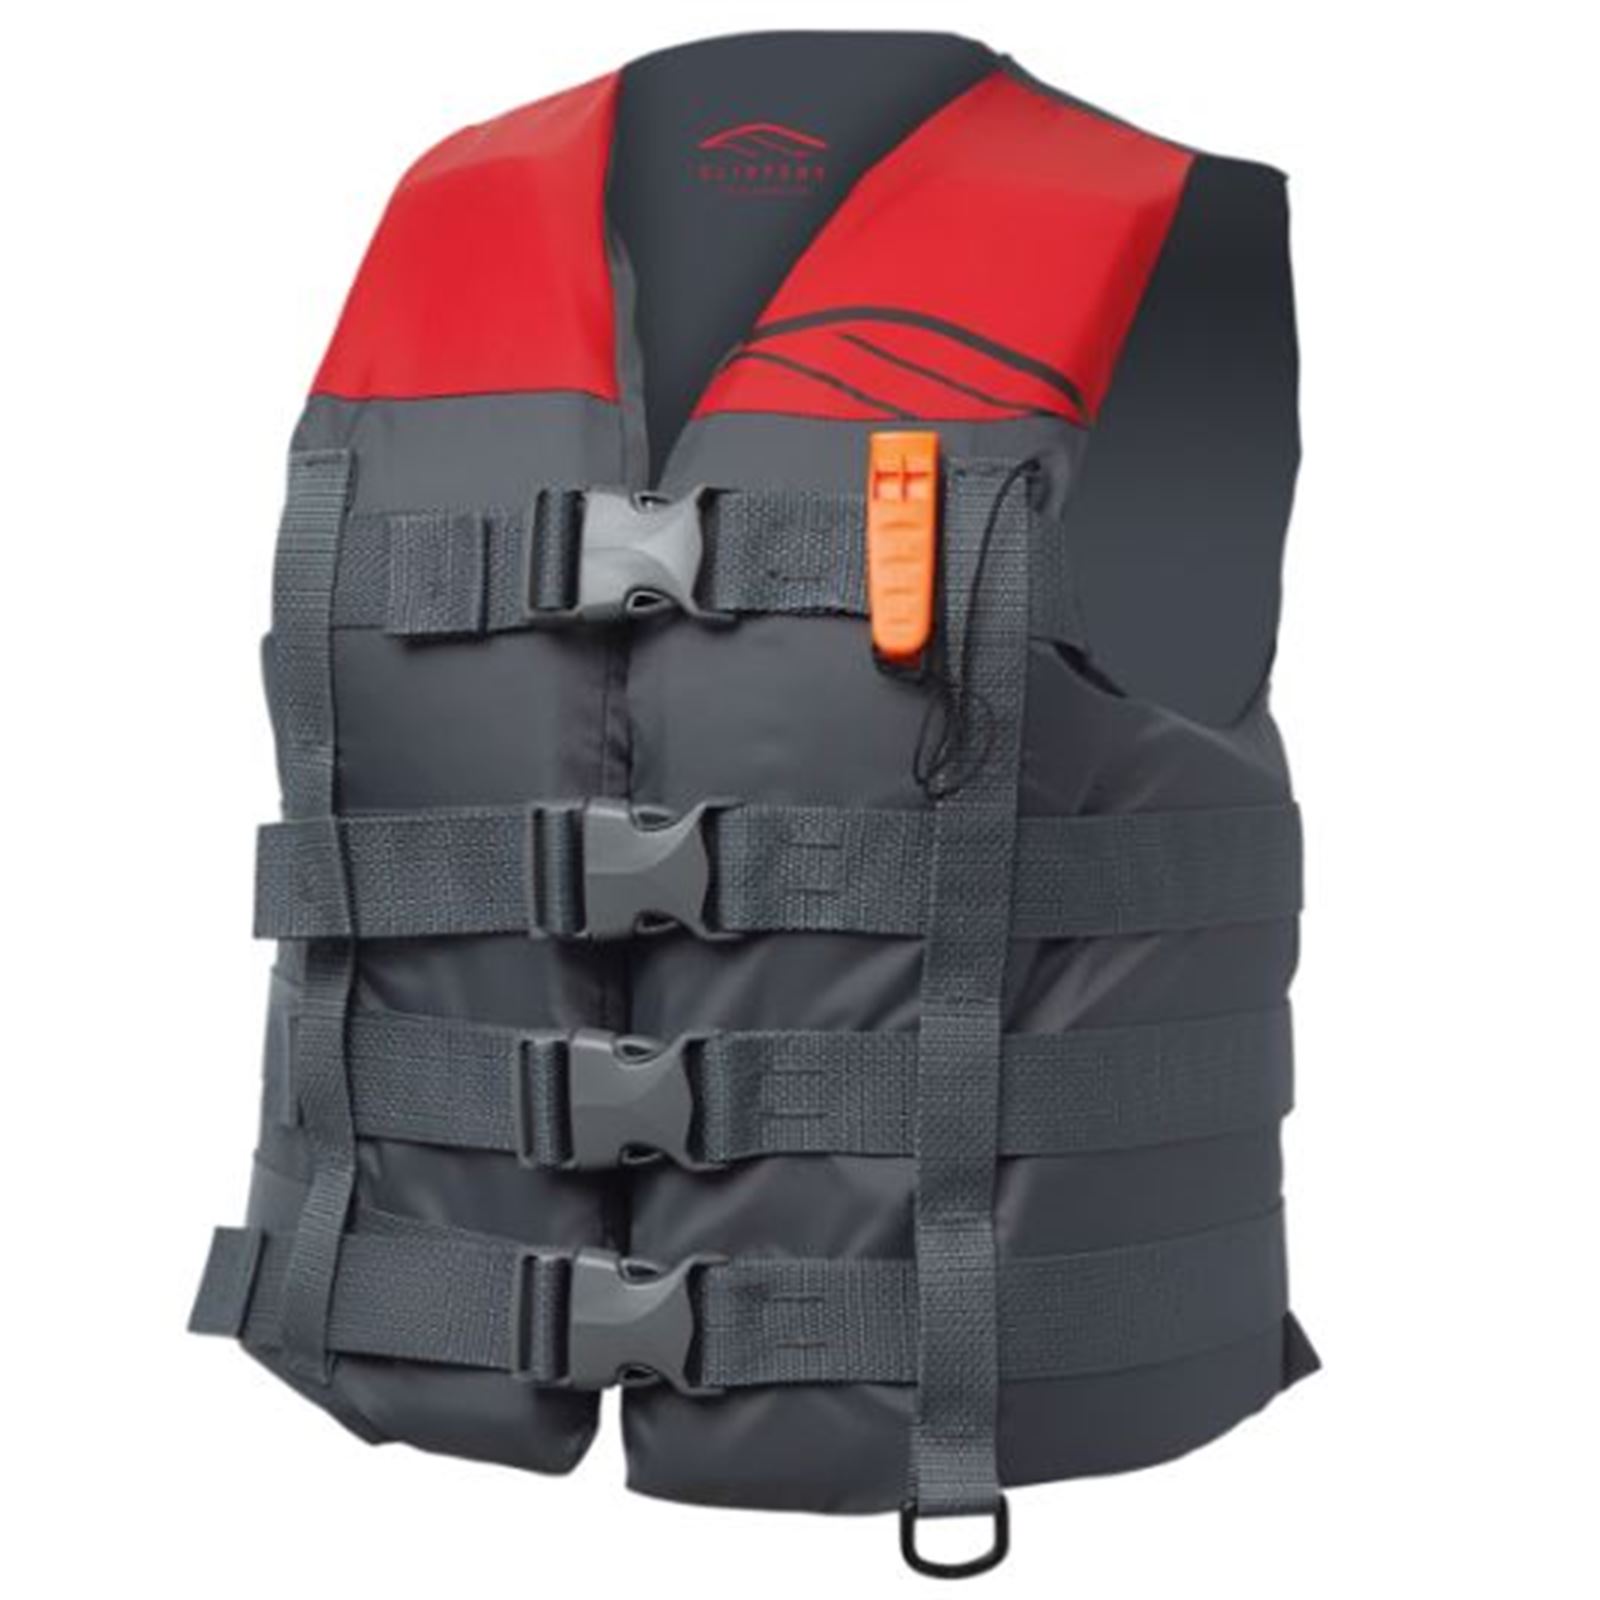 Slippery Hydro Vest - Charcoal/Red Small/Medium 32"-42"